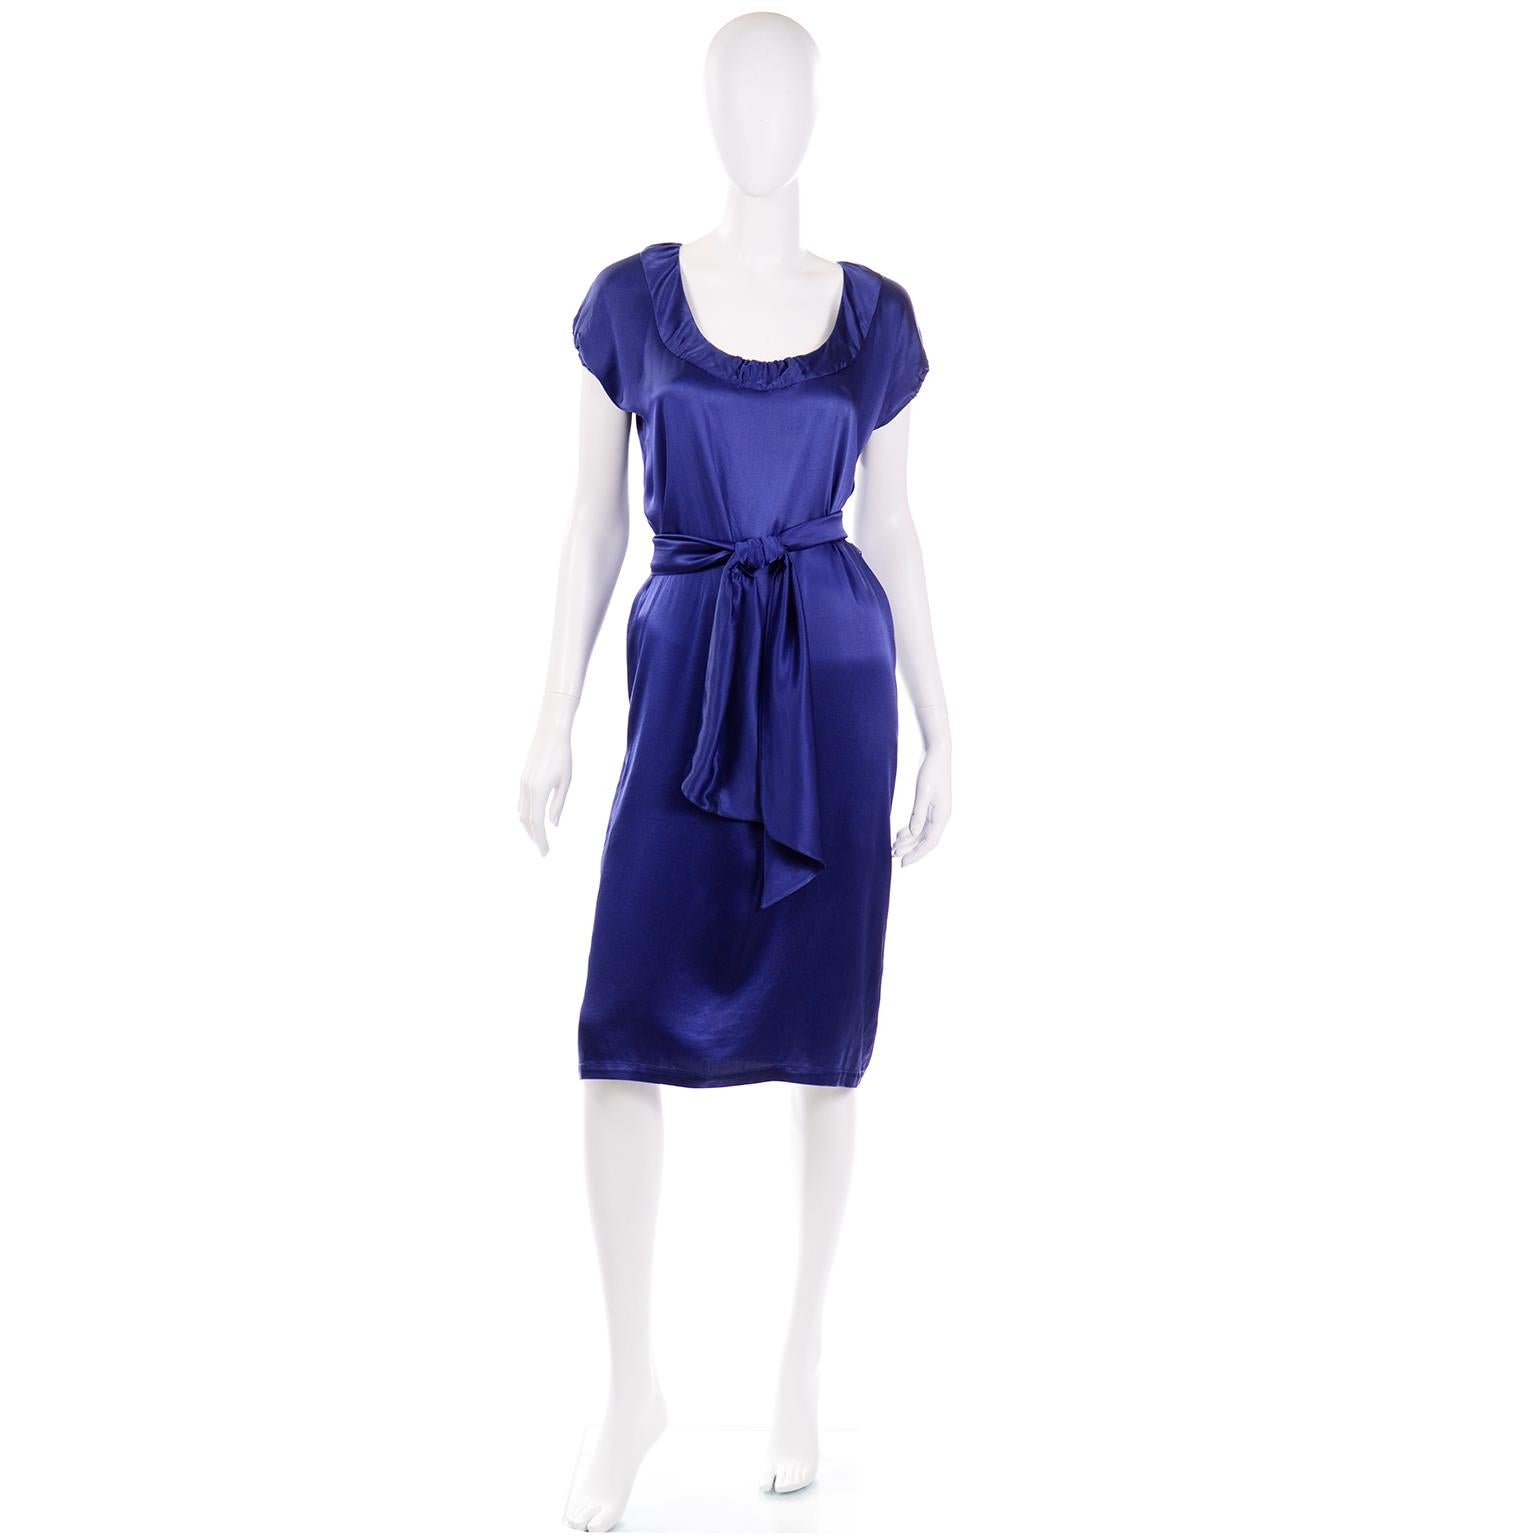 This is a stunning Yves Saint Laurent rich saturated blue silk charmeuse dress with its original matching belt.  The neckline is a wide scoop neck with a gathered center and the sleeves are a dolman cap sleeve with an elastic arm opening. This dress